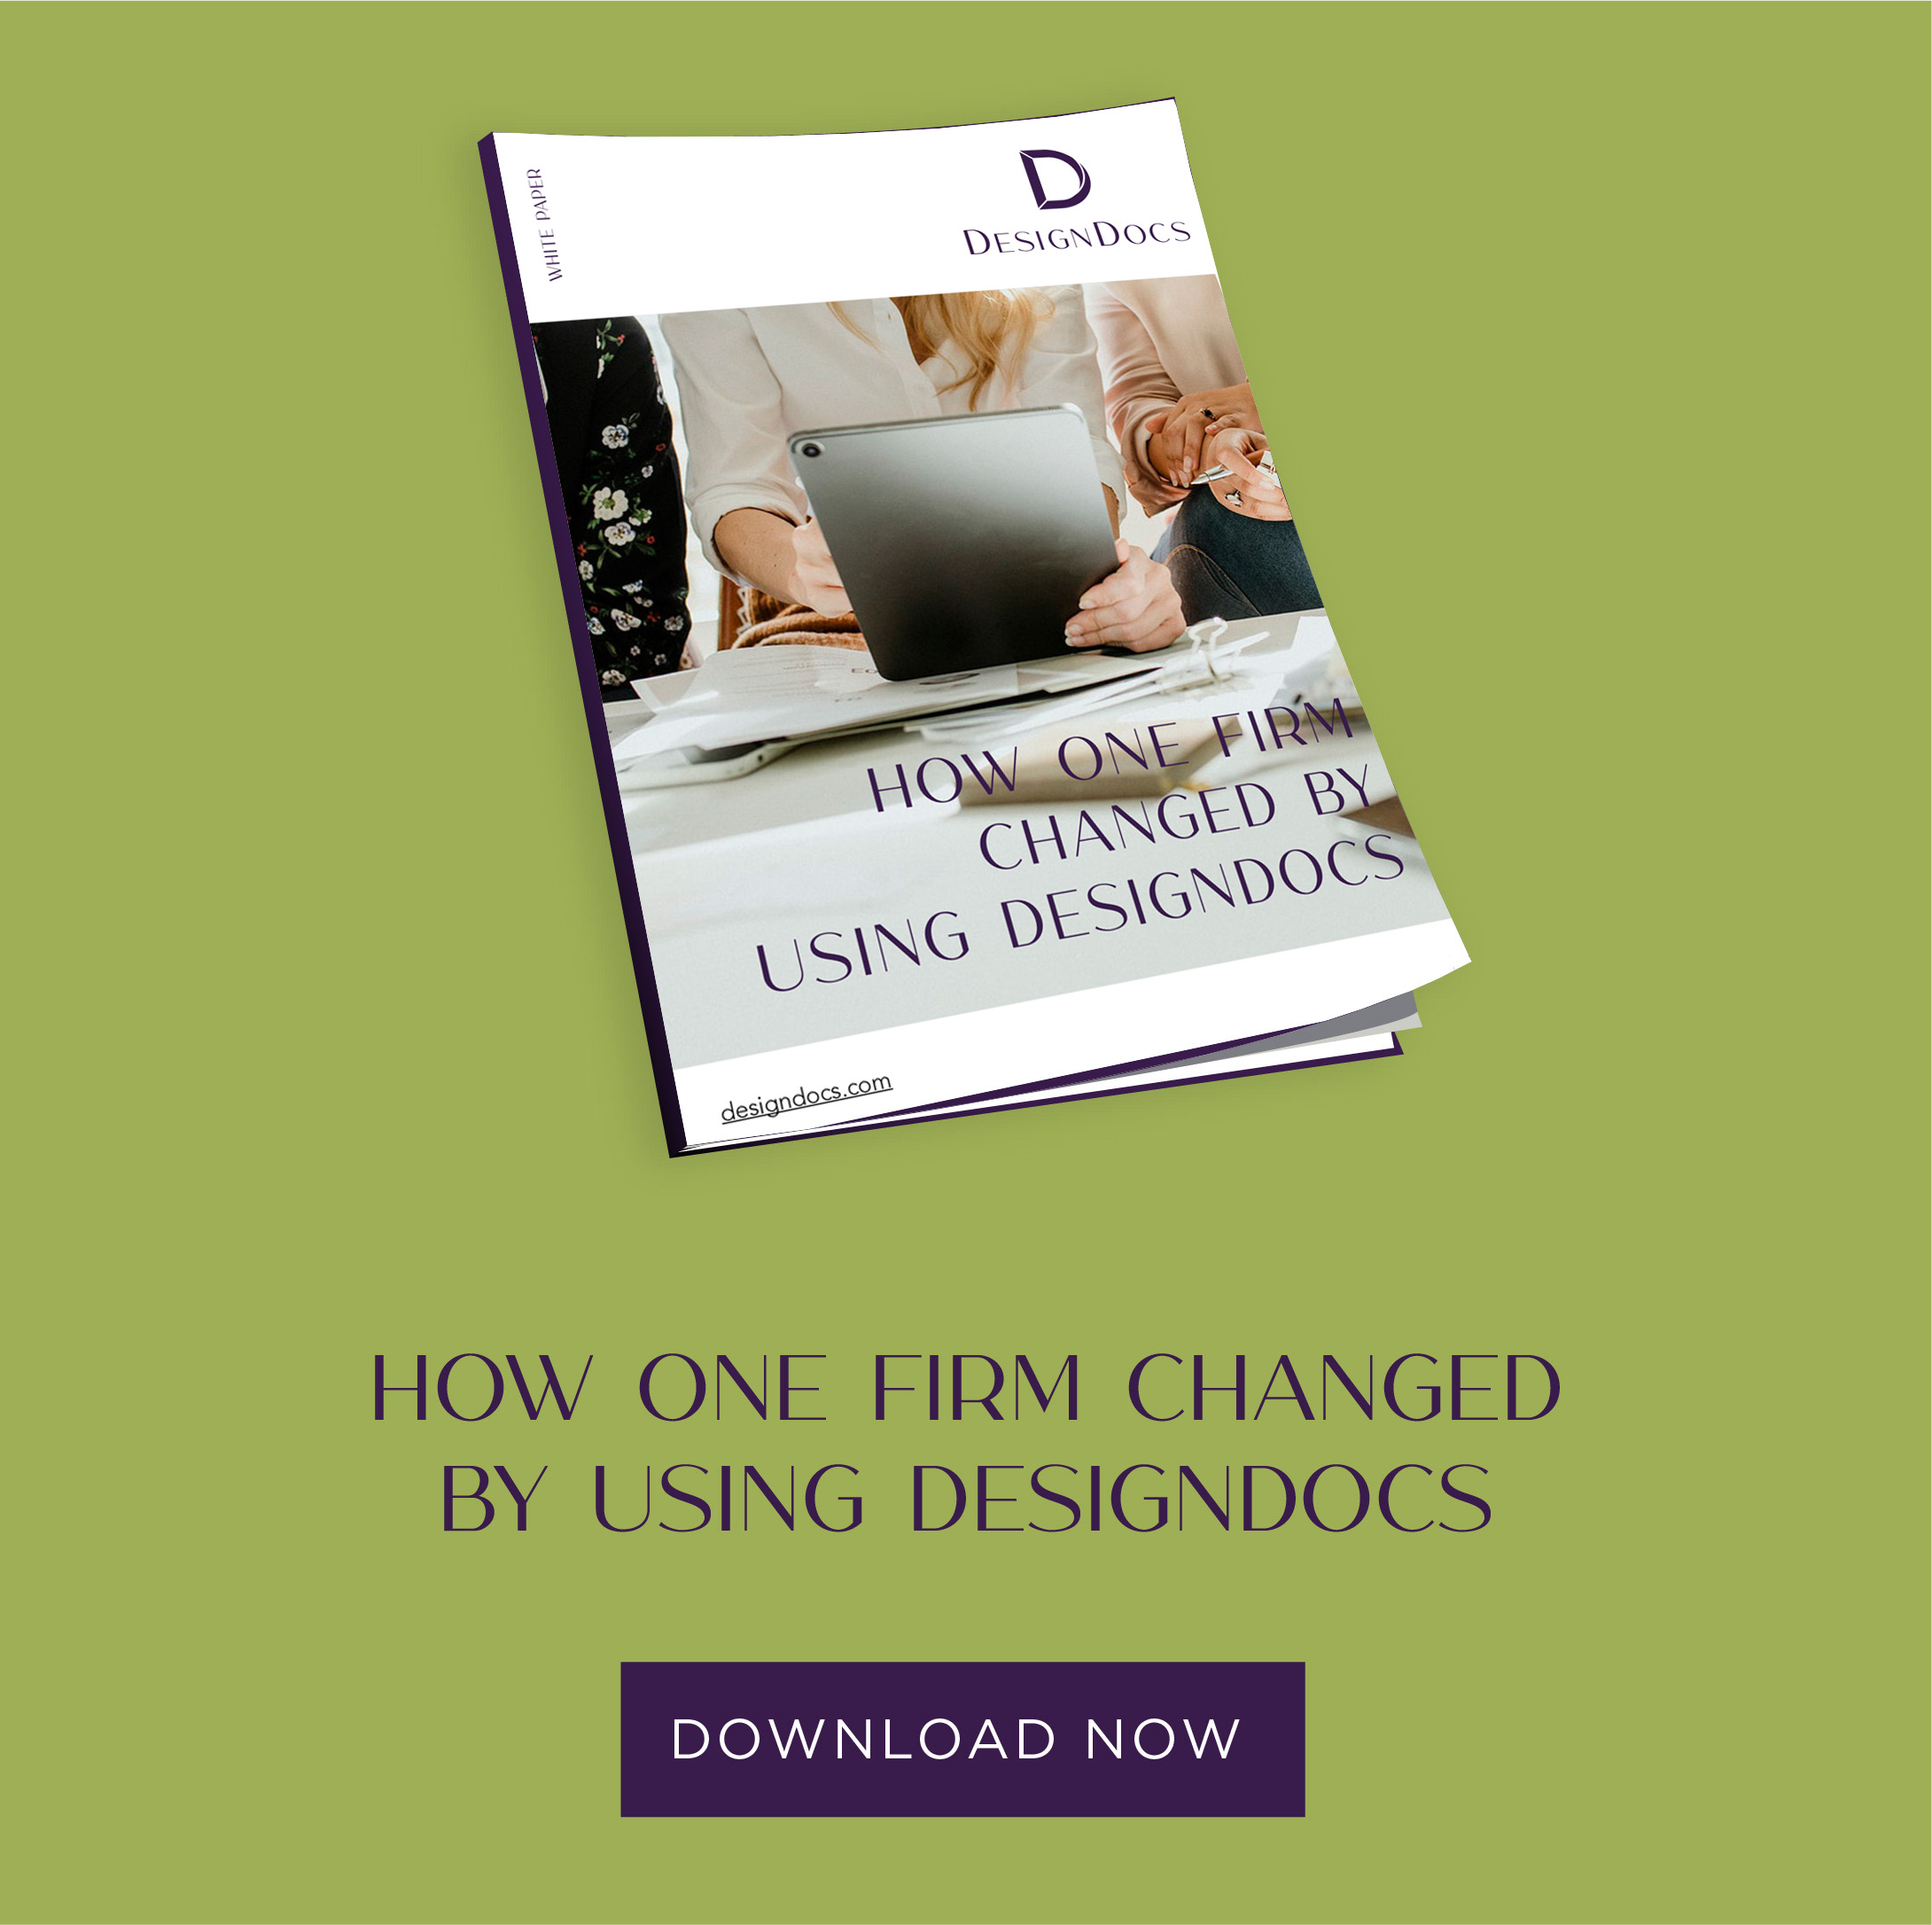 DESIGNDOCS WHITEPAPER - How One Firm Changed by Using DesignDocs